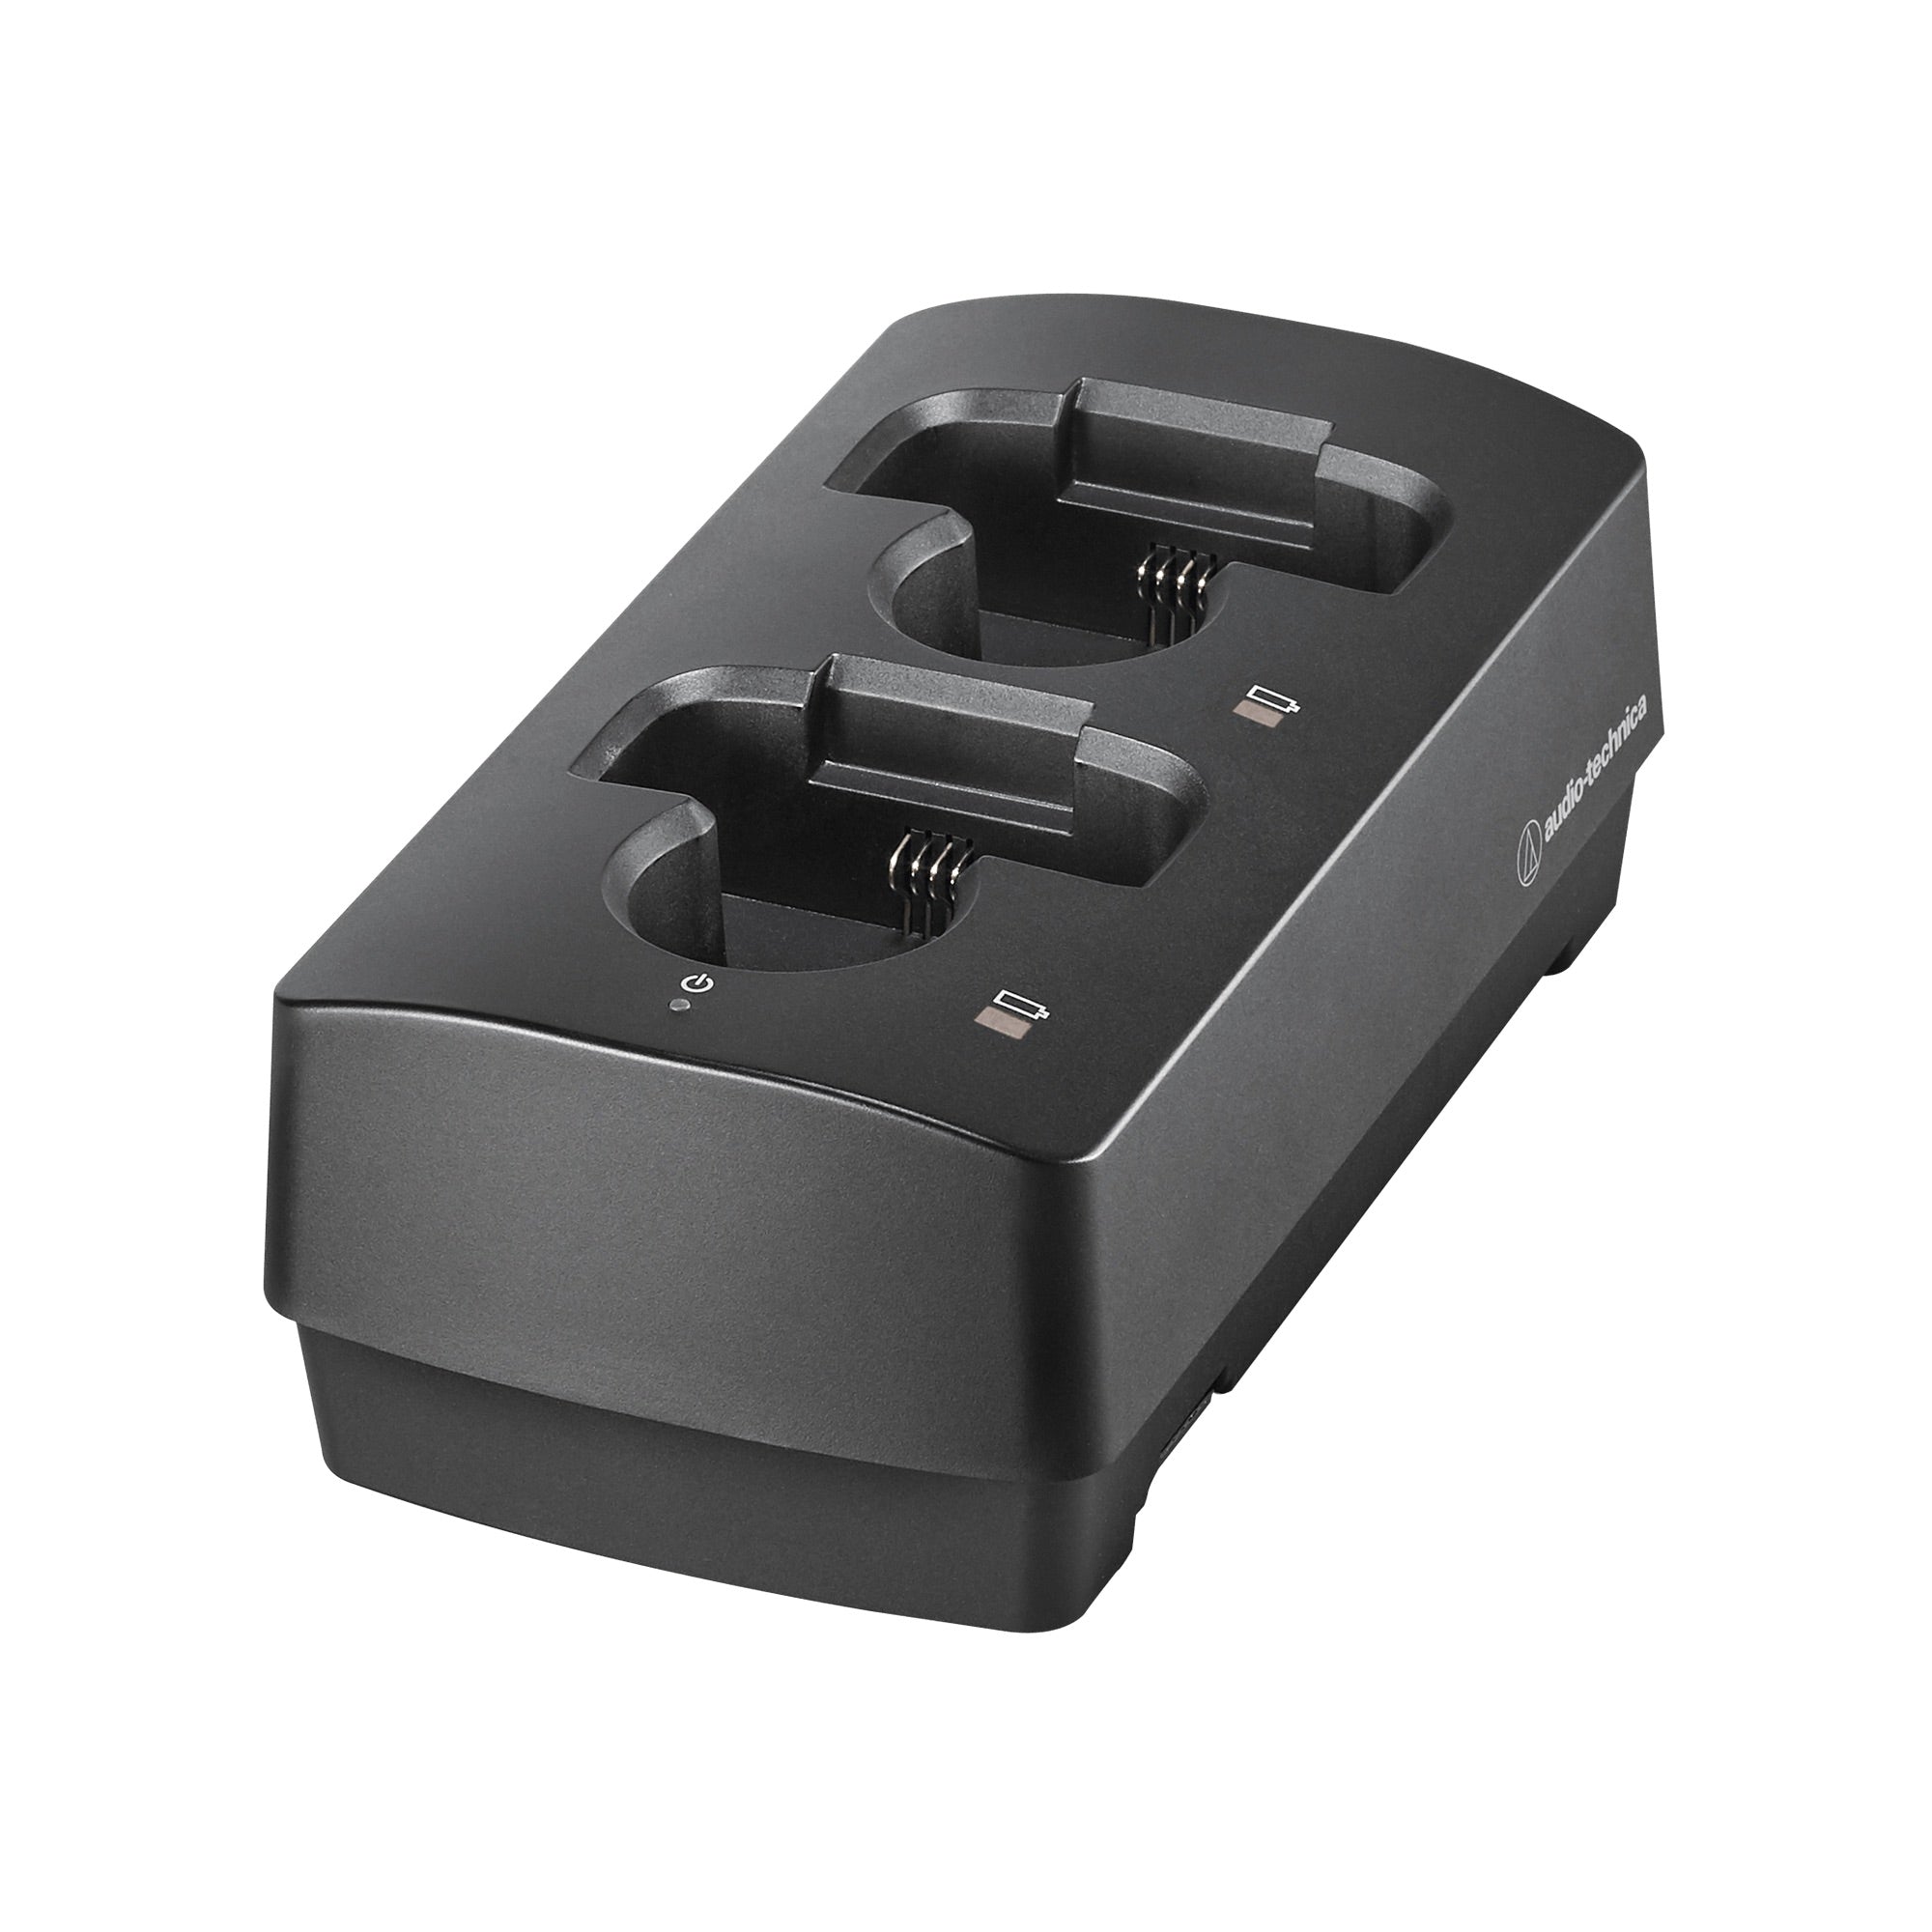 Audio-Technica ATW-CHG3 - Two-Bay Charging Station